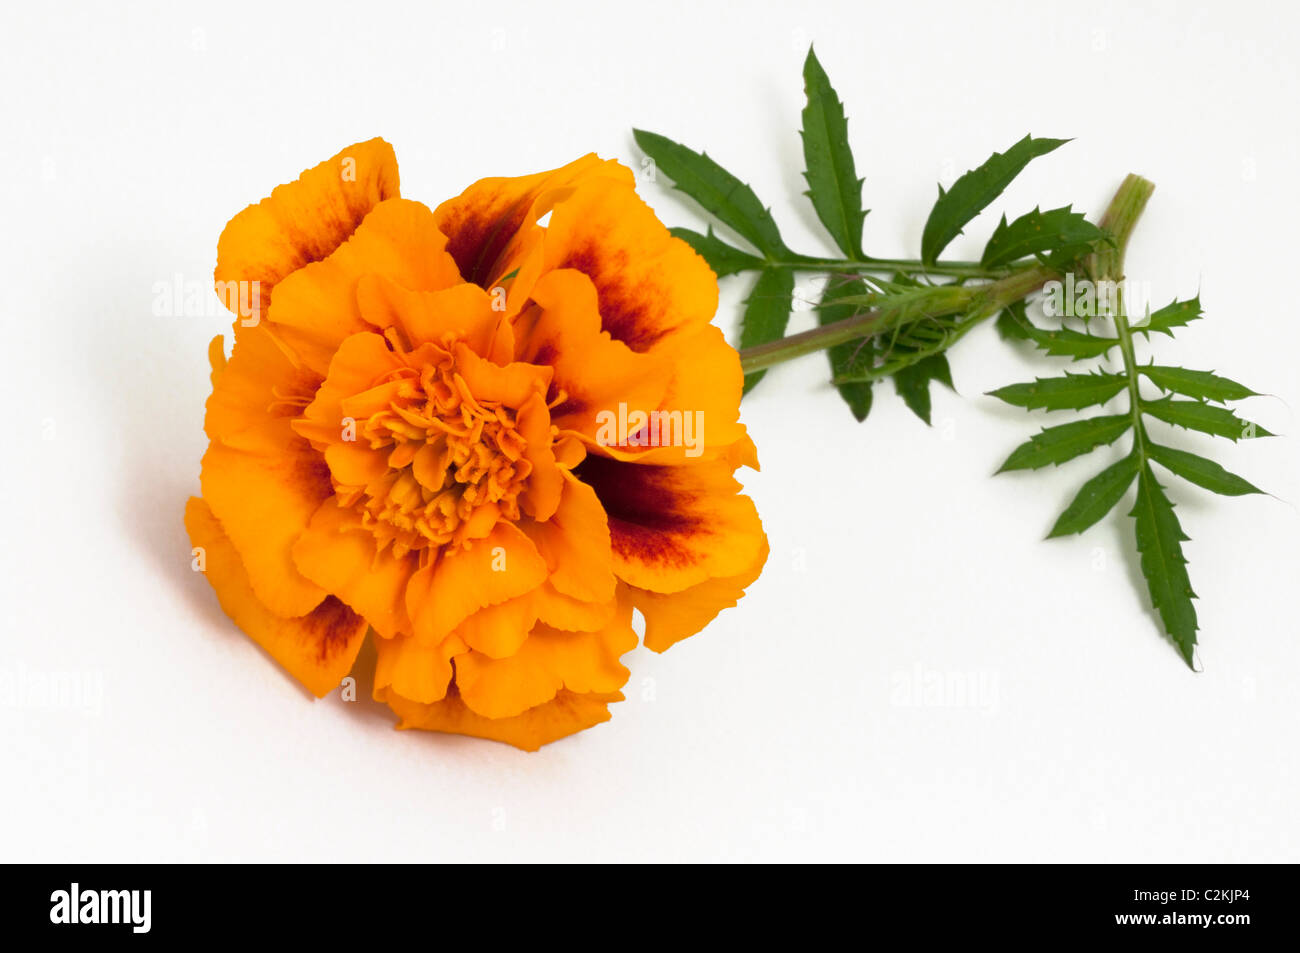 Tagetes (Tagetes sp.), flowering stem. Studio picture against a white background. Stock Photo